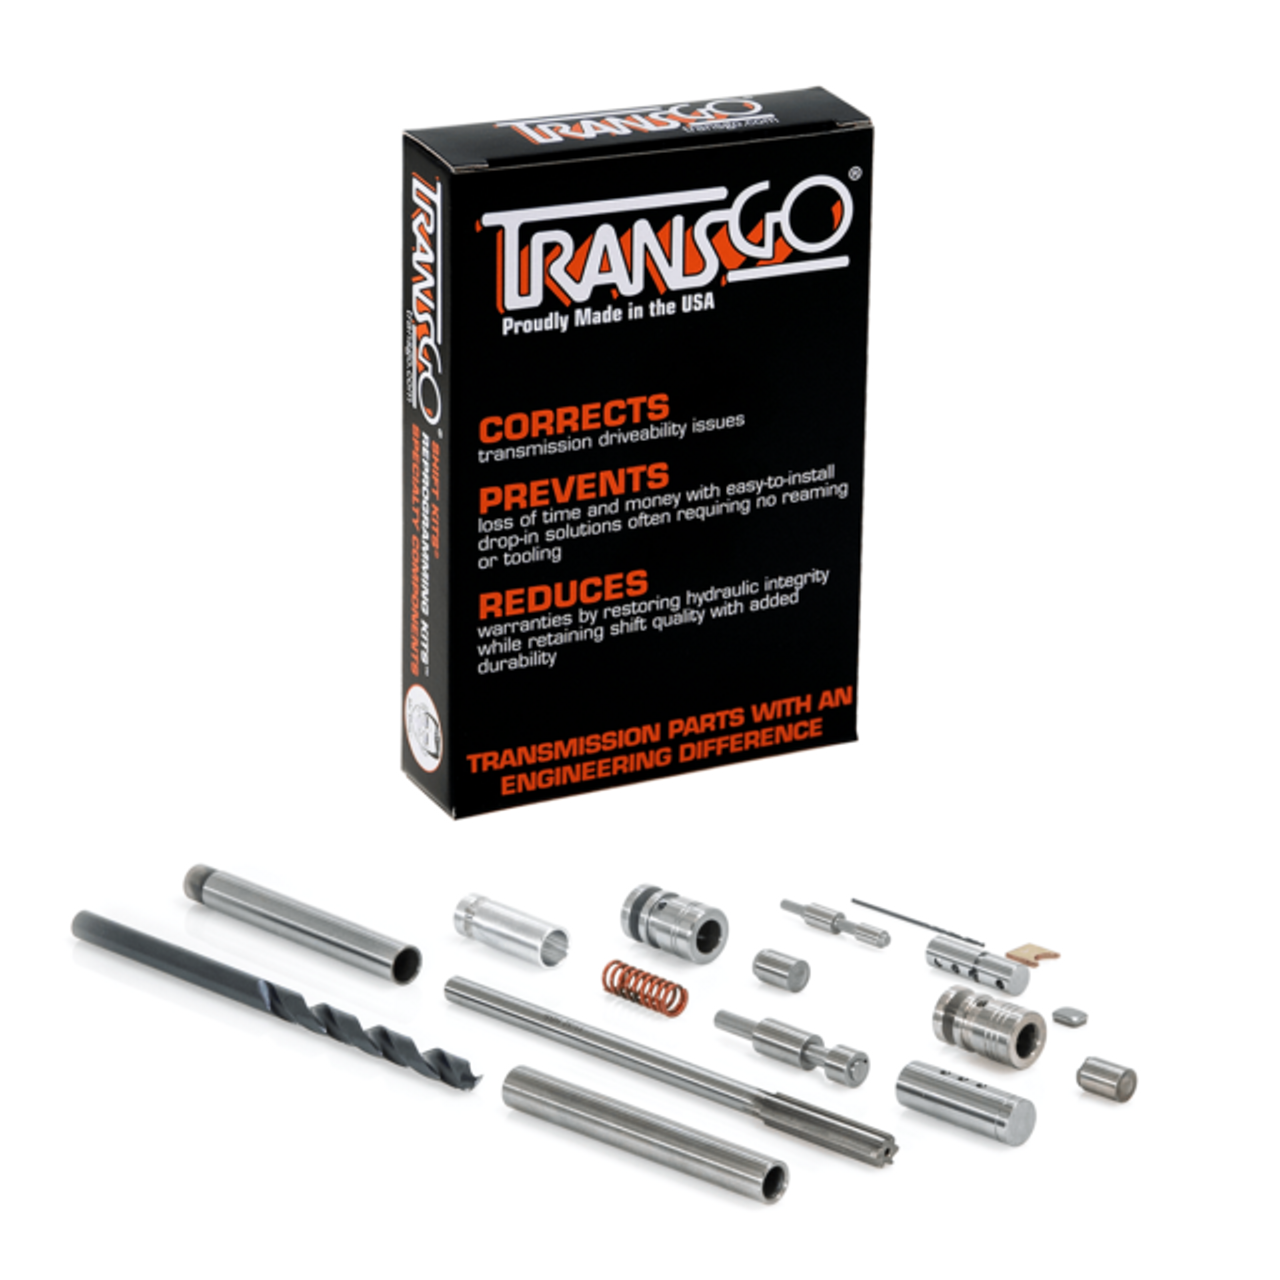 This A750 SHIFT KIT® Valve Body Repair Kit fits 2003 and newer Toyota and Lexus vehicles equipped with the A750, A760, A761, A960 and AB60 series automatic transmissions.